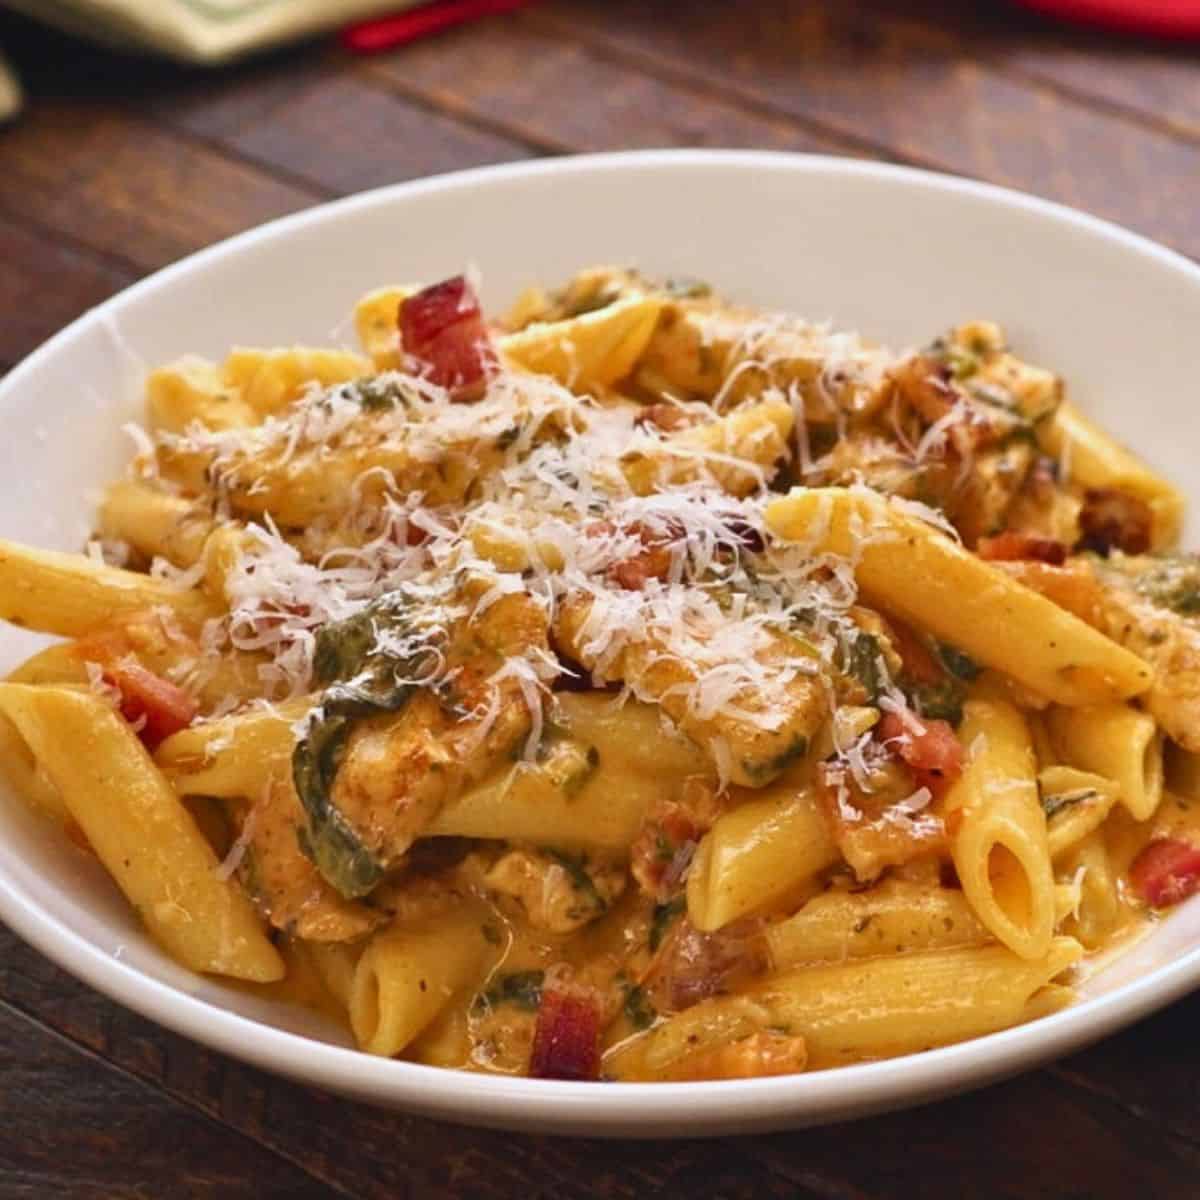 Creamy chicken and bacon pasta in bowl.